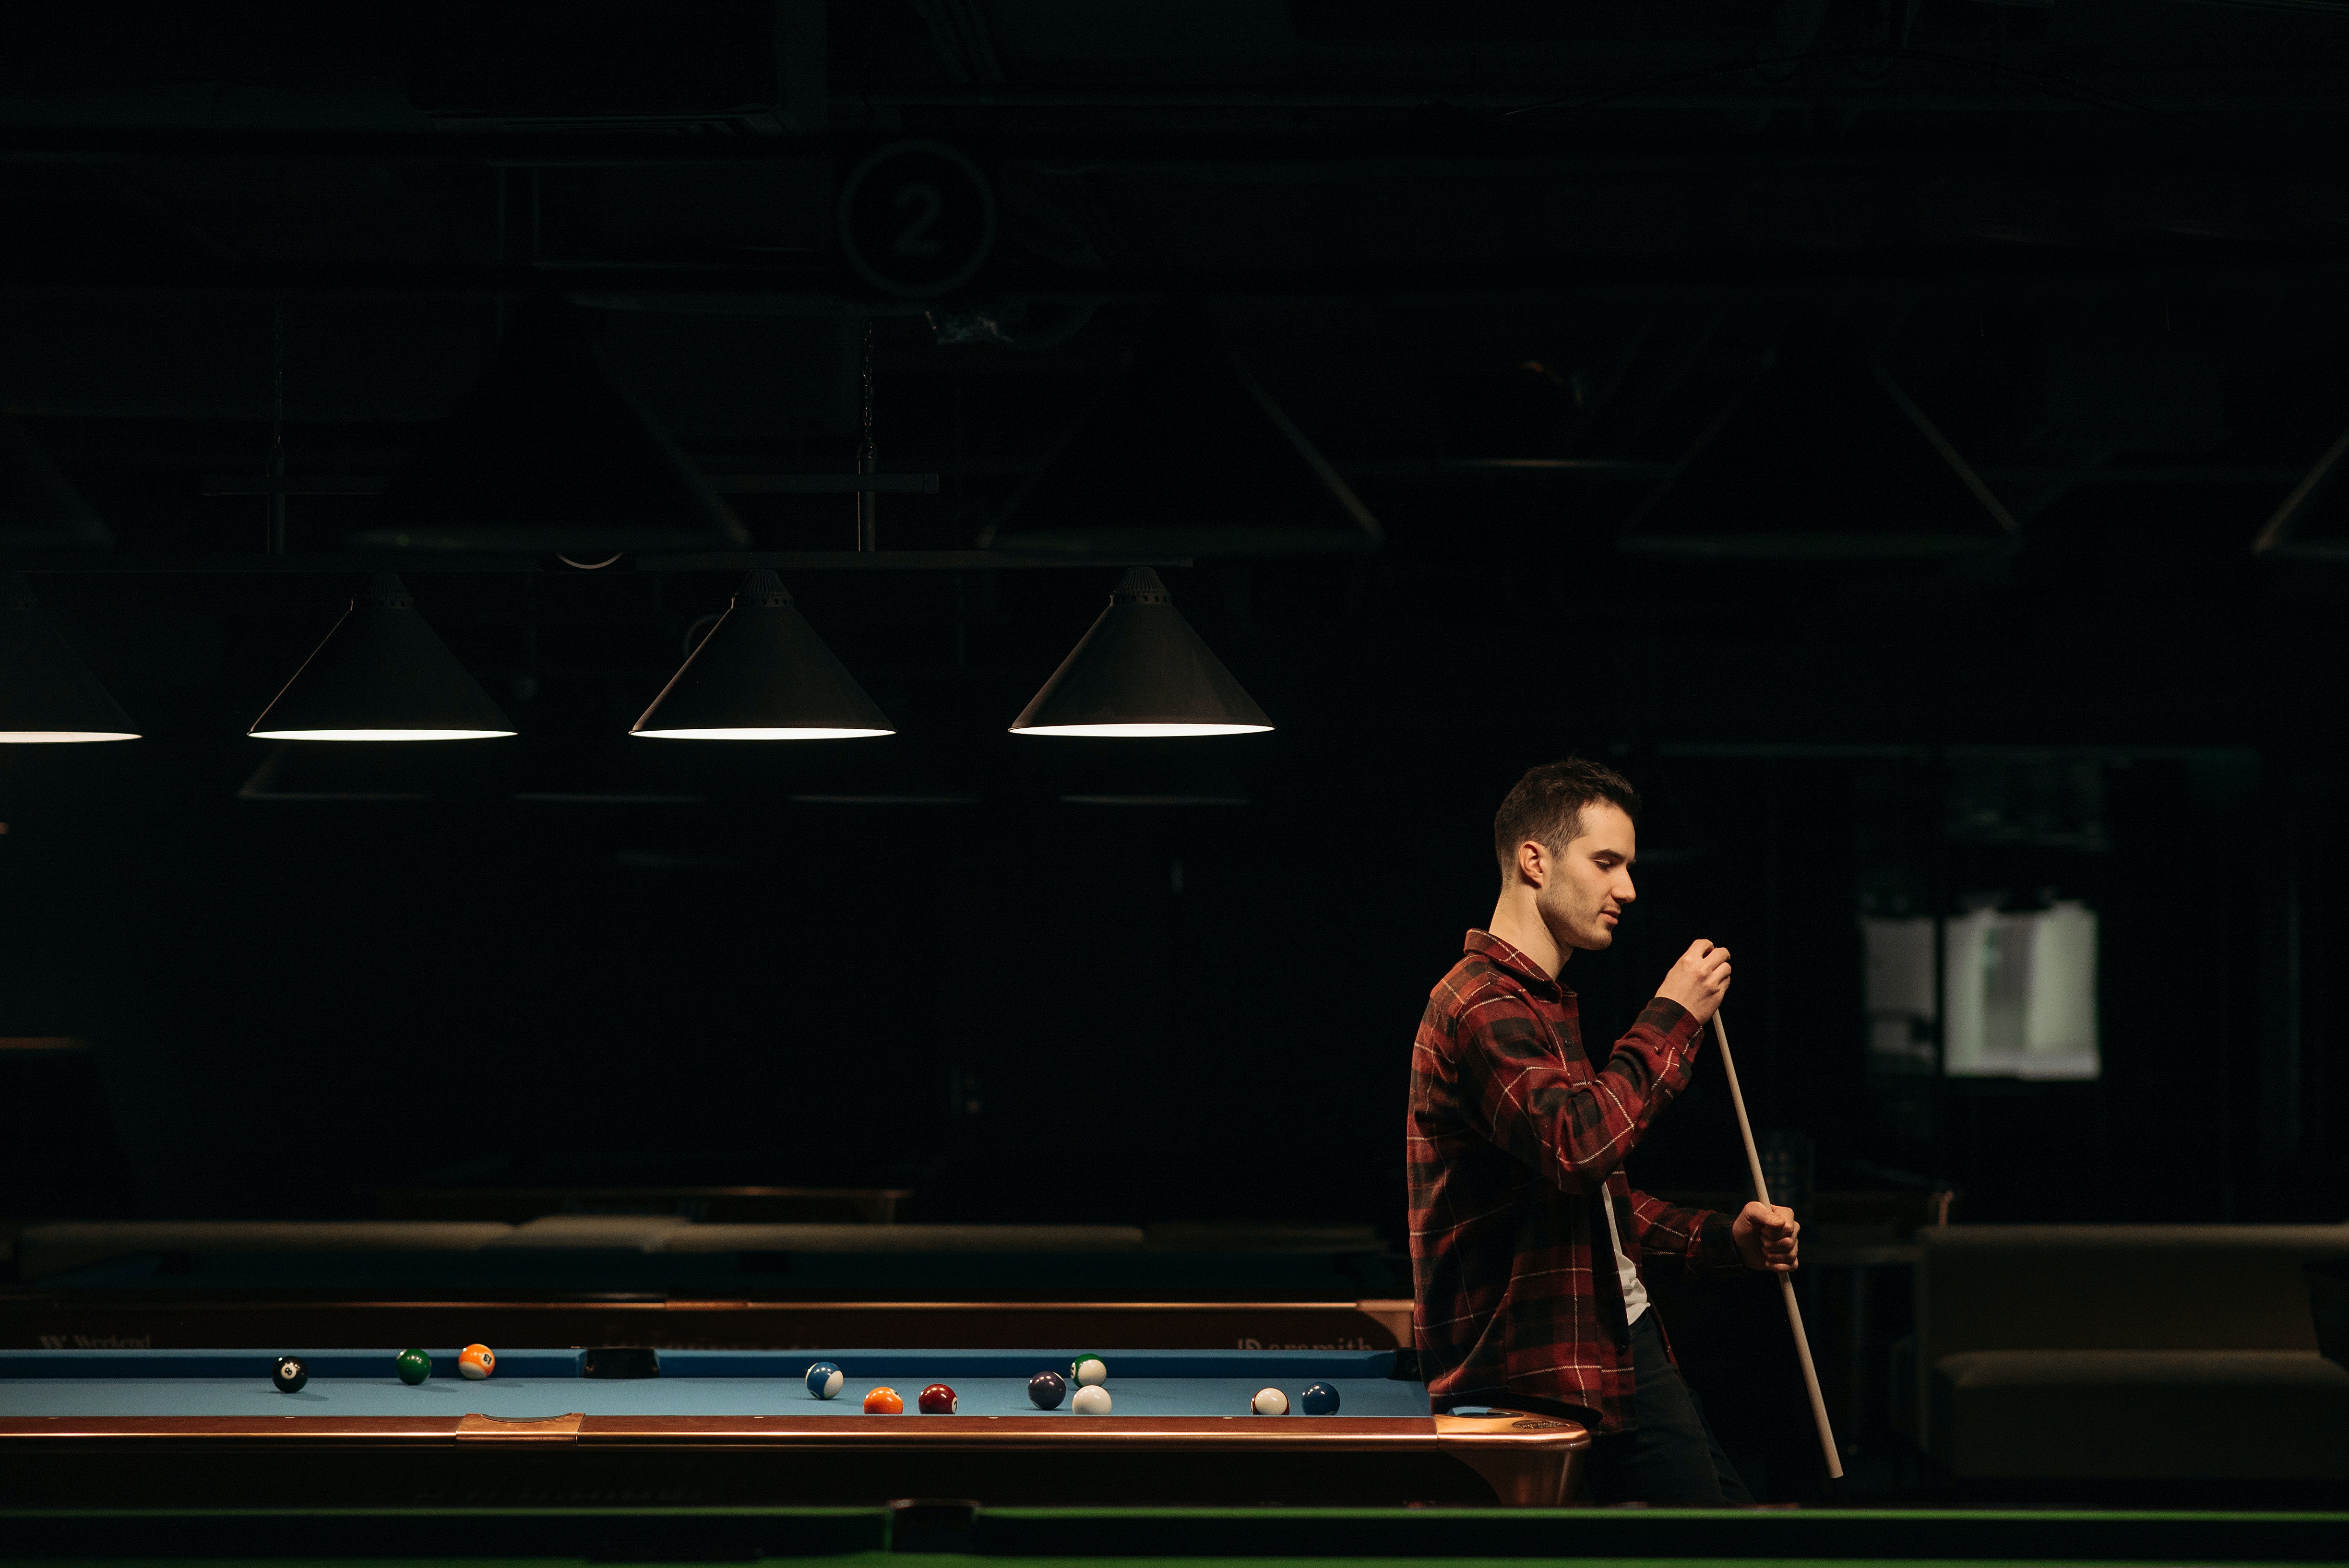 Man chalking cue while playing billiards solo